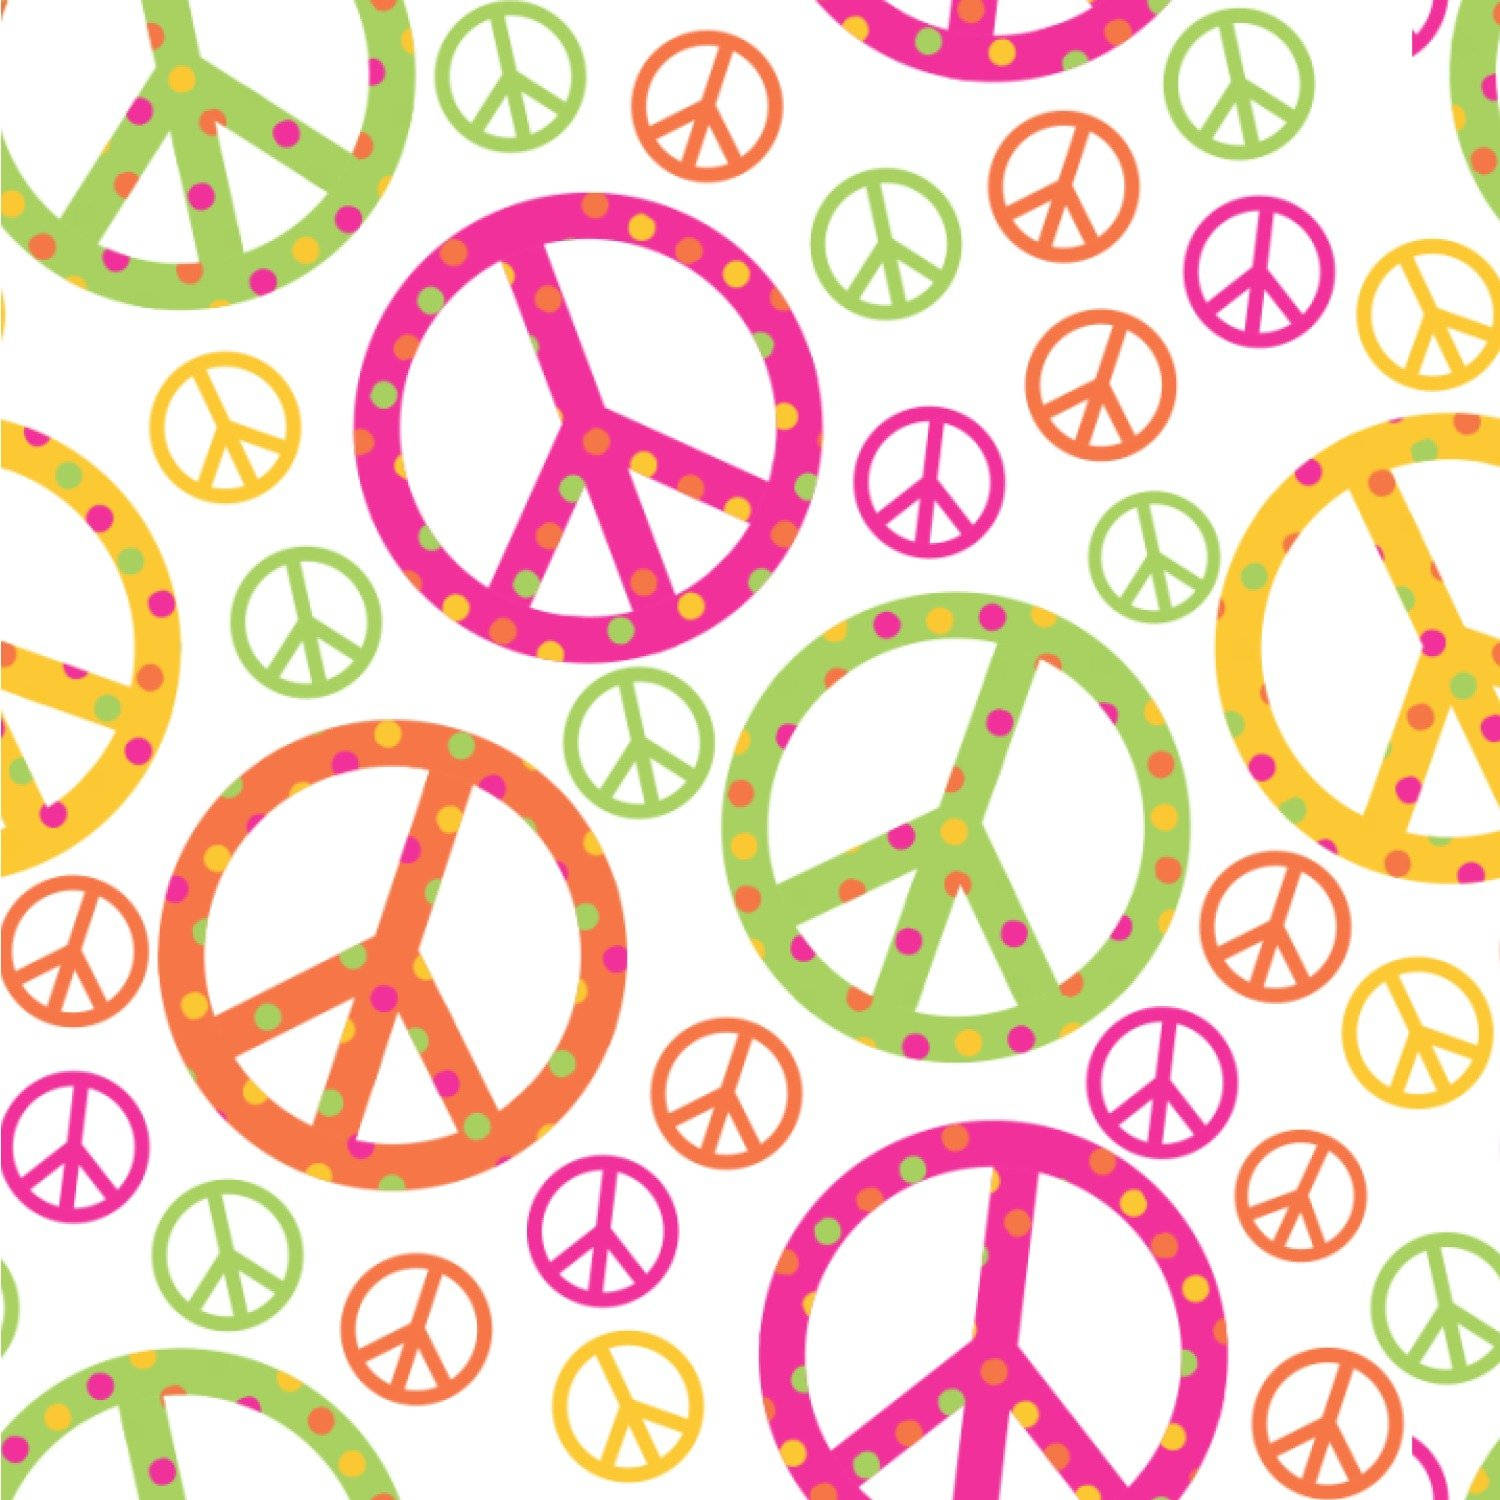 Colorful Peace Symbol With Polka Dots